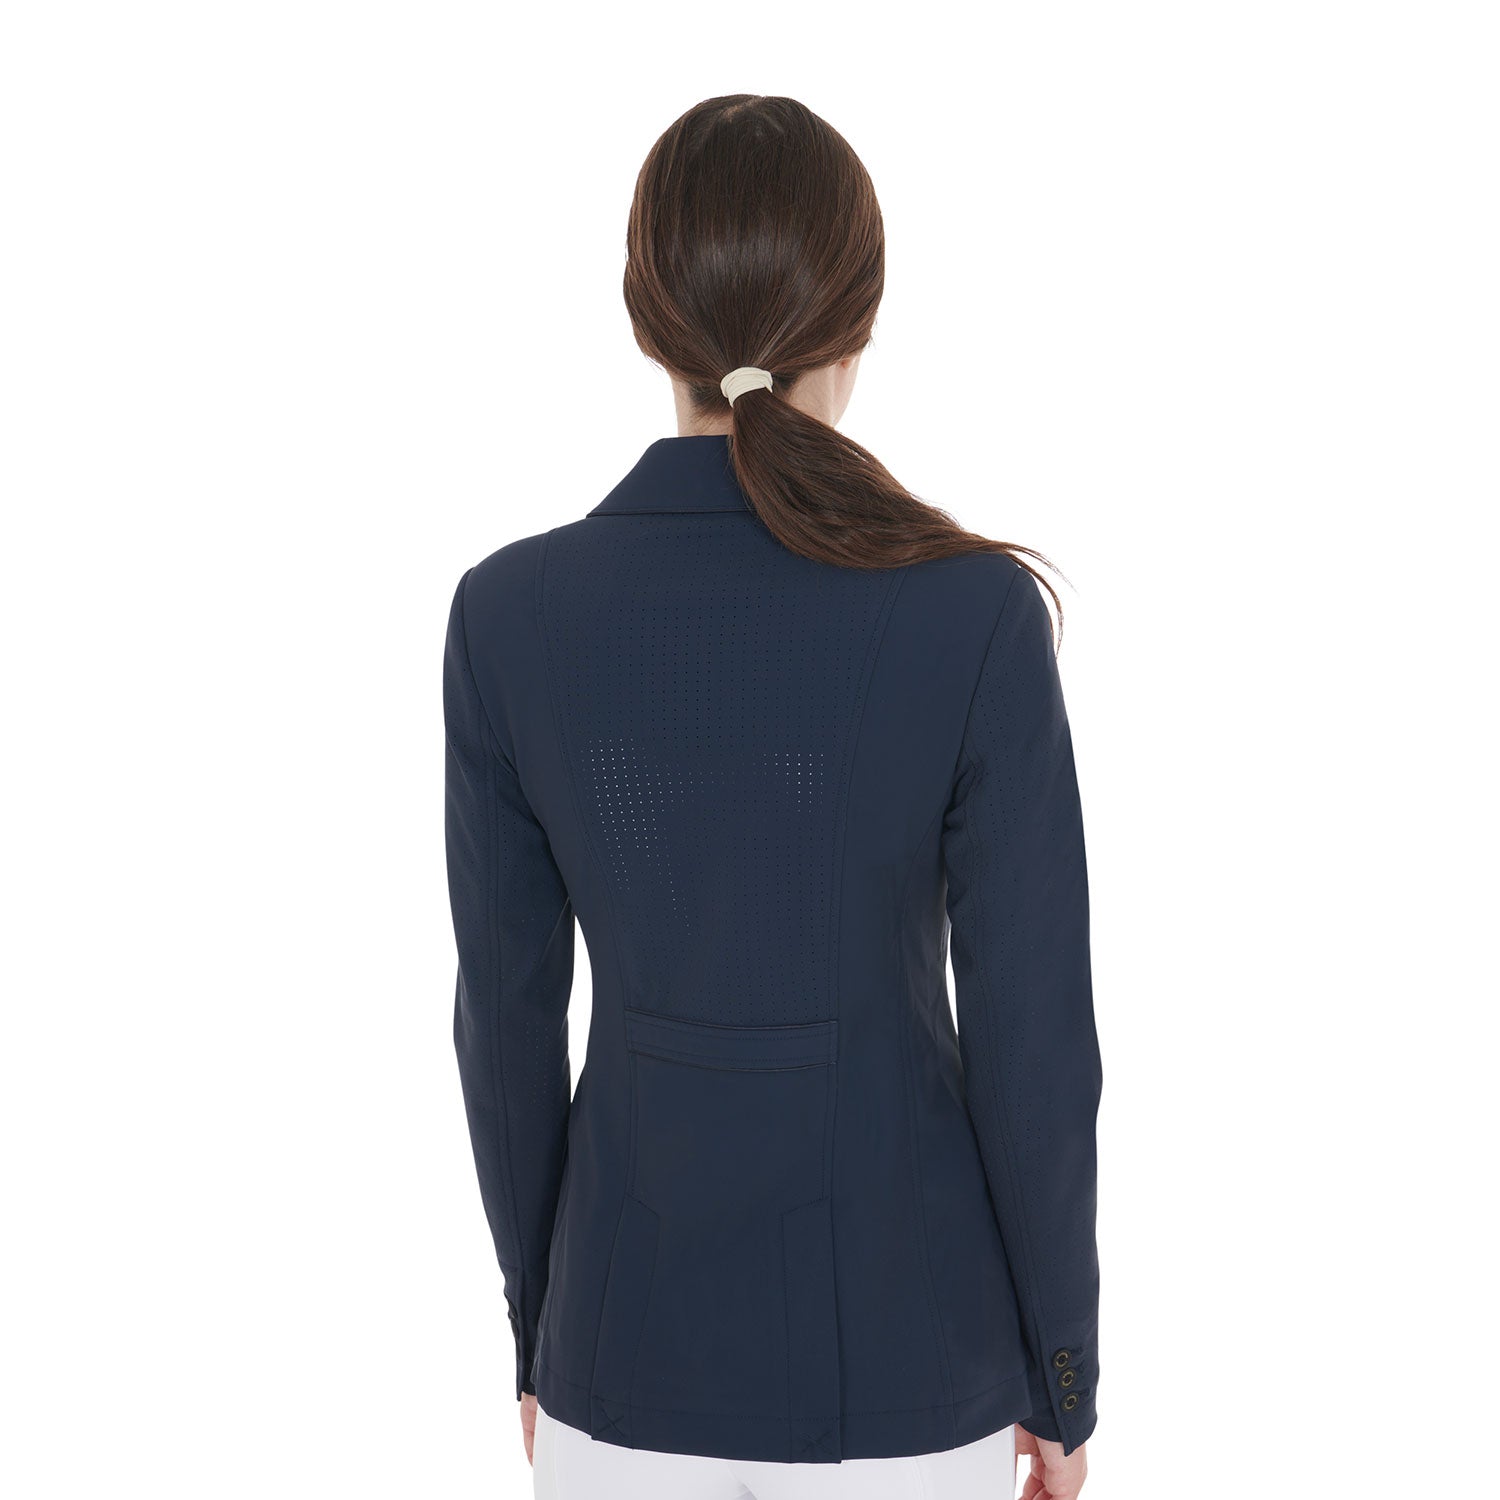 Ladies show jacket with perforated fabric 